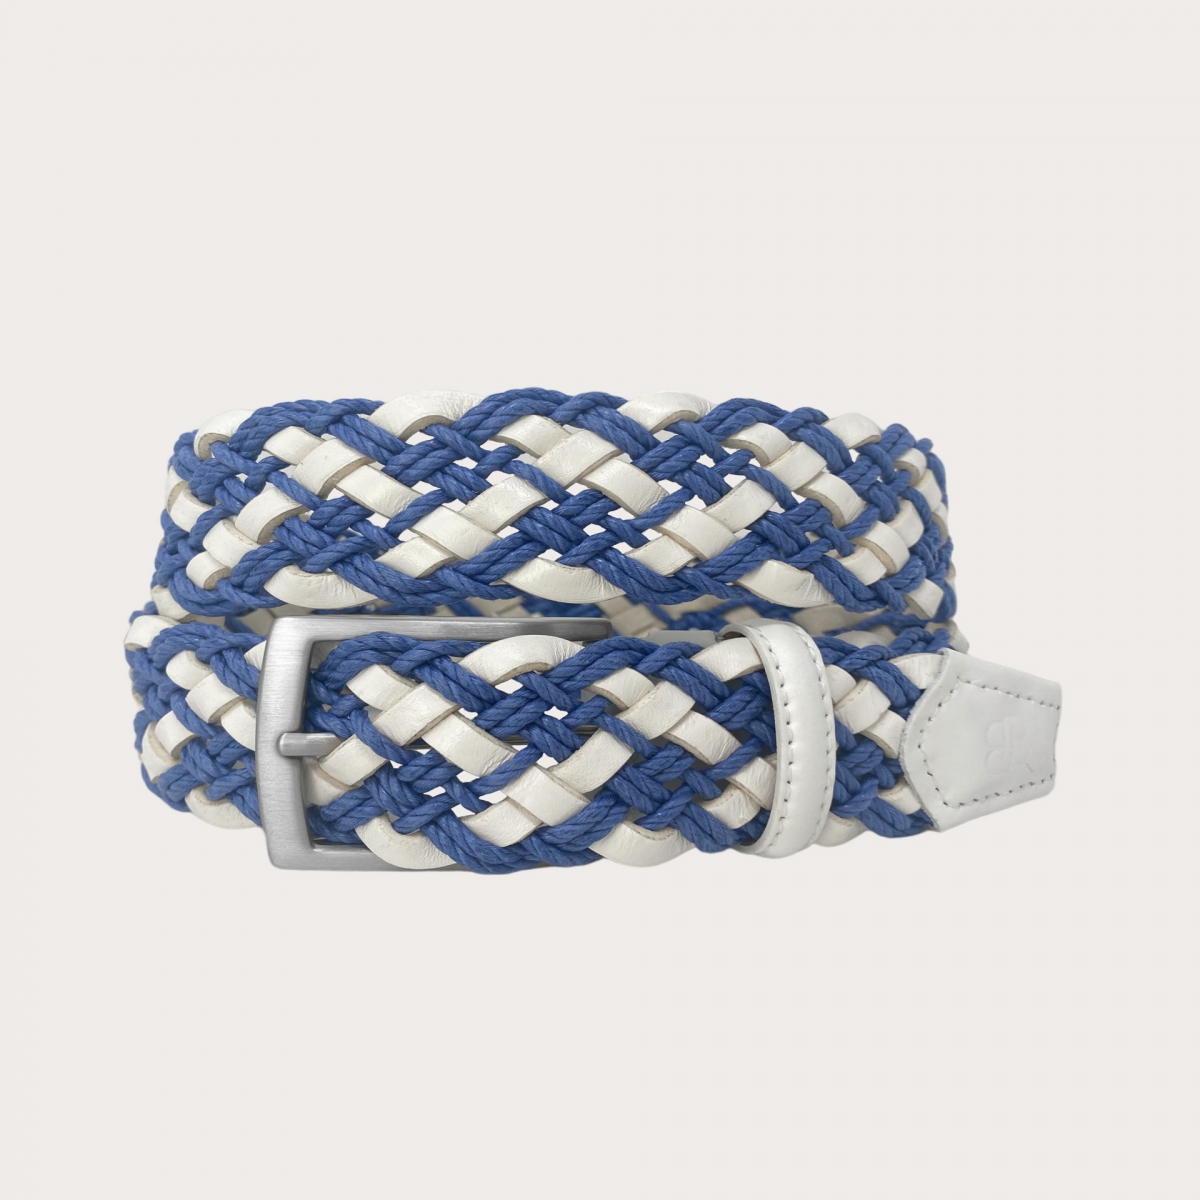 BRUCLE Braided white and blue leather and cotton belt